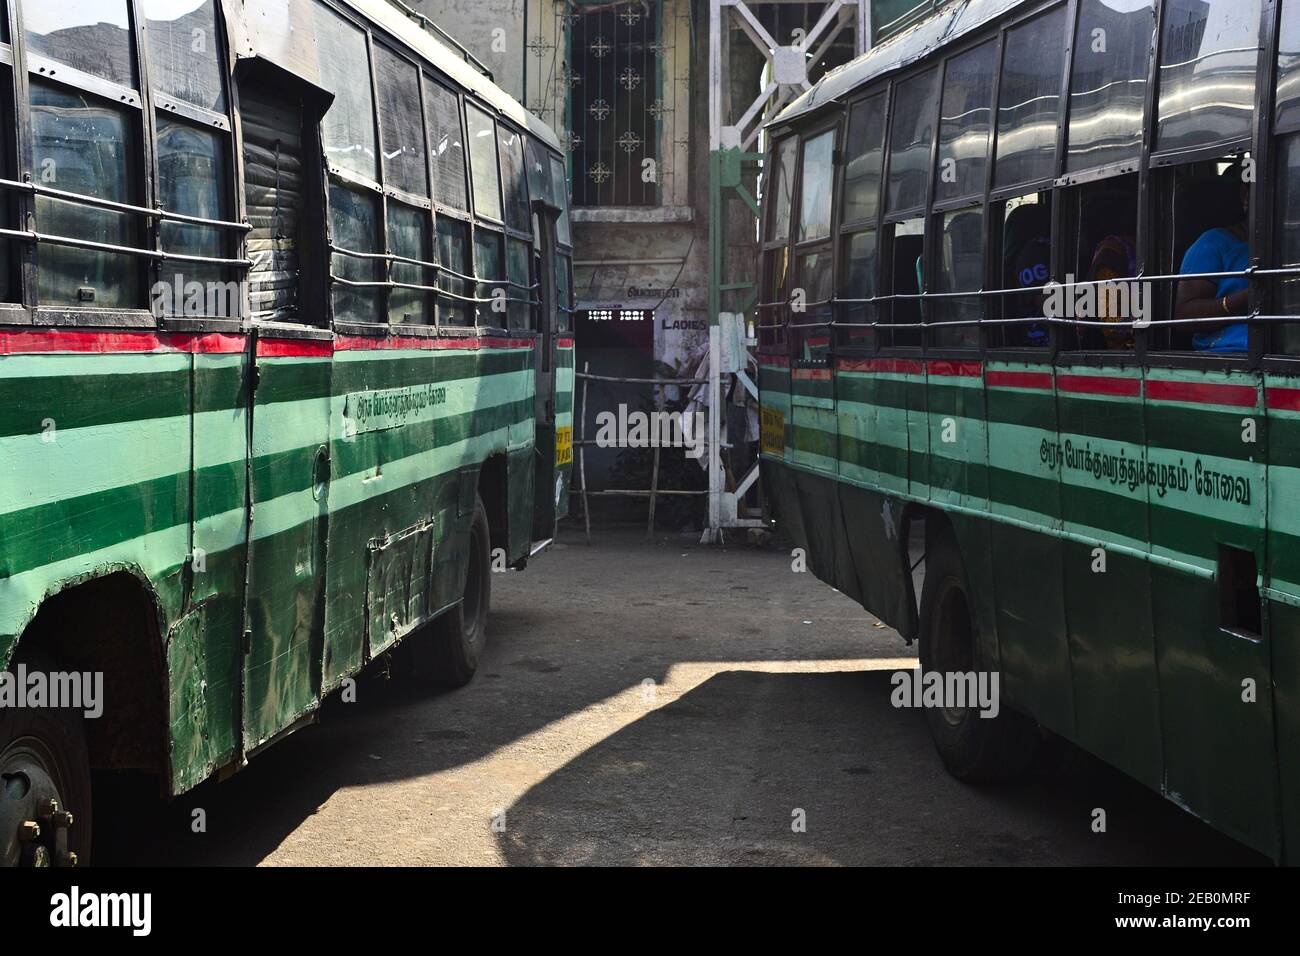 Sulthan Bathery, Kerala, India - January, 2017: Two green buses on the bus station. Stock Photo